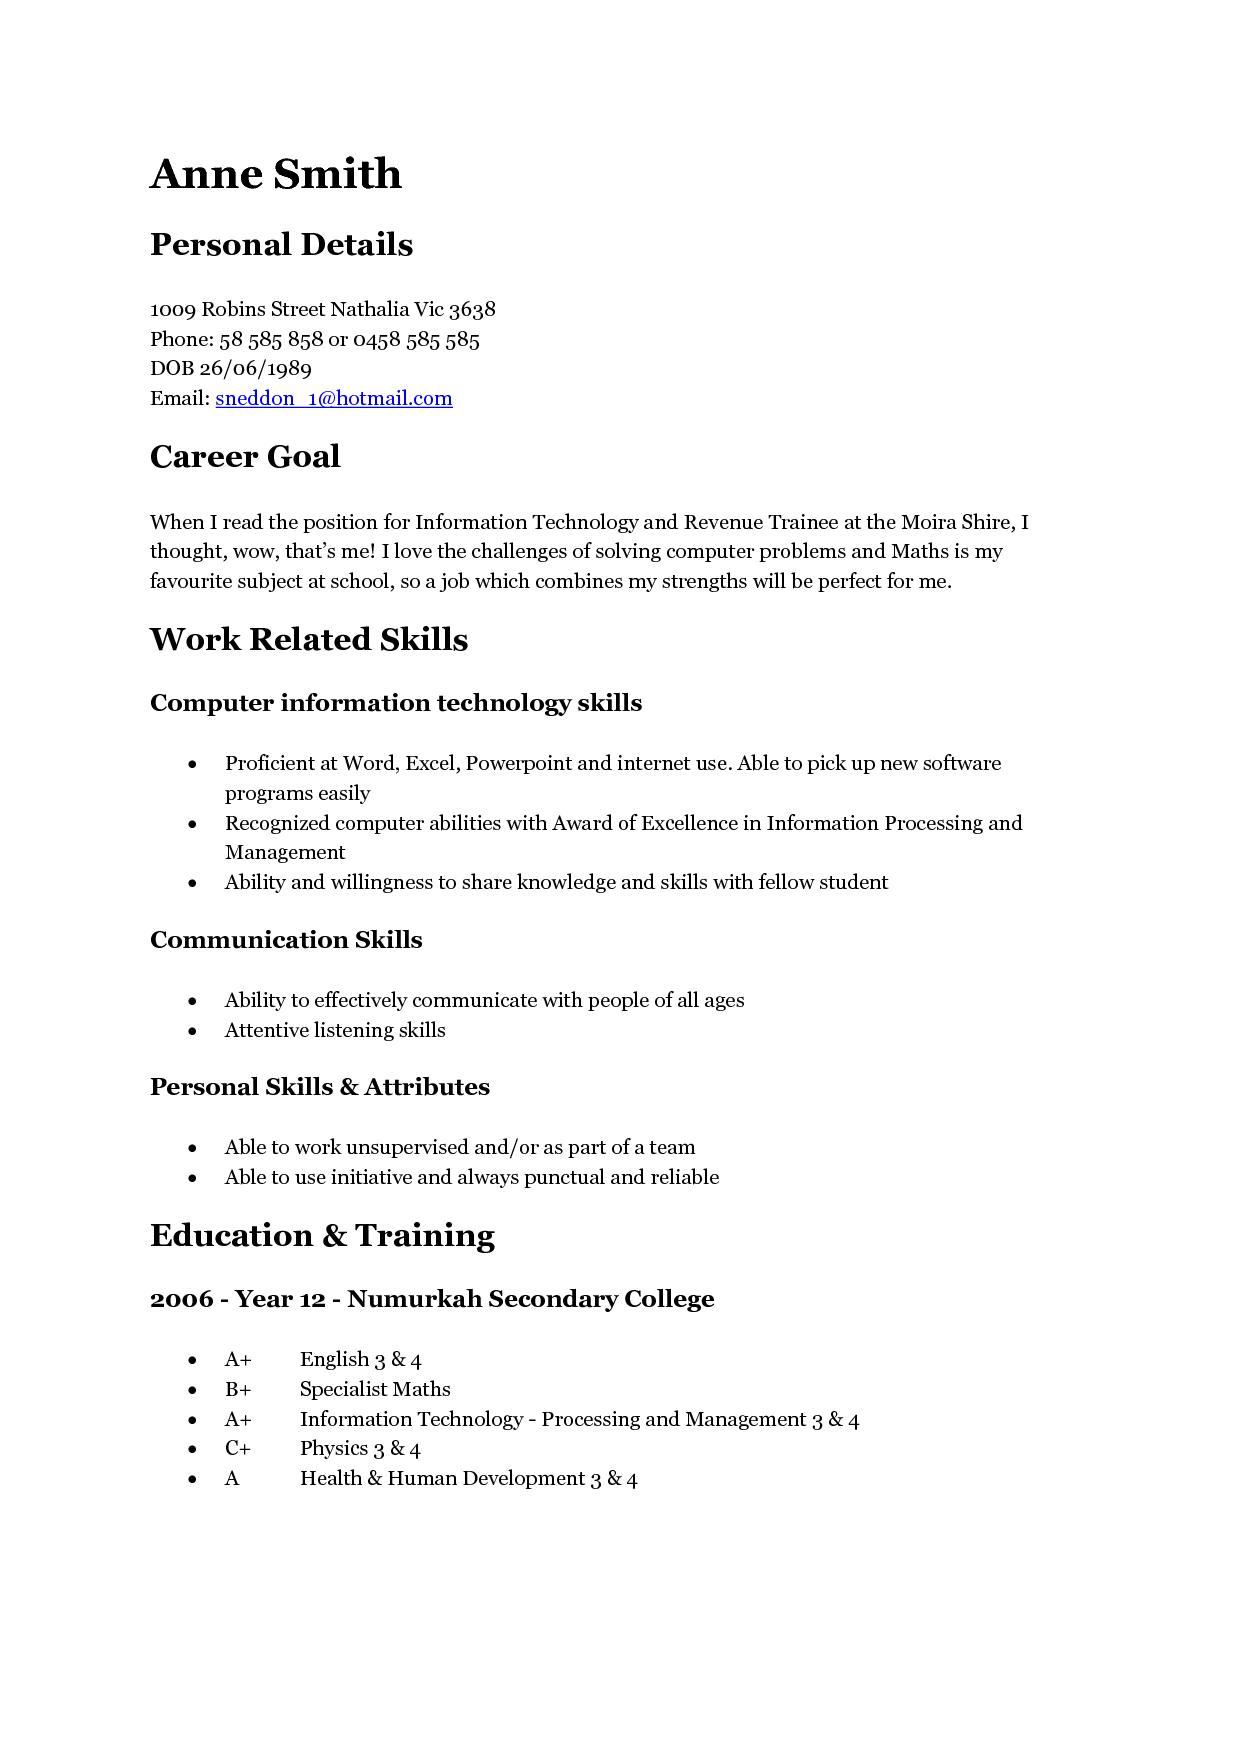 Resume Tips Templates Resume Templates For Teens Resume Resumetemplates Teens Resume